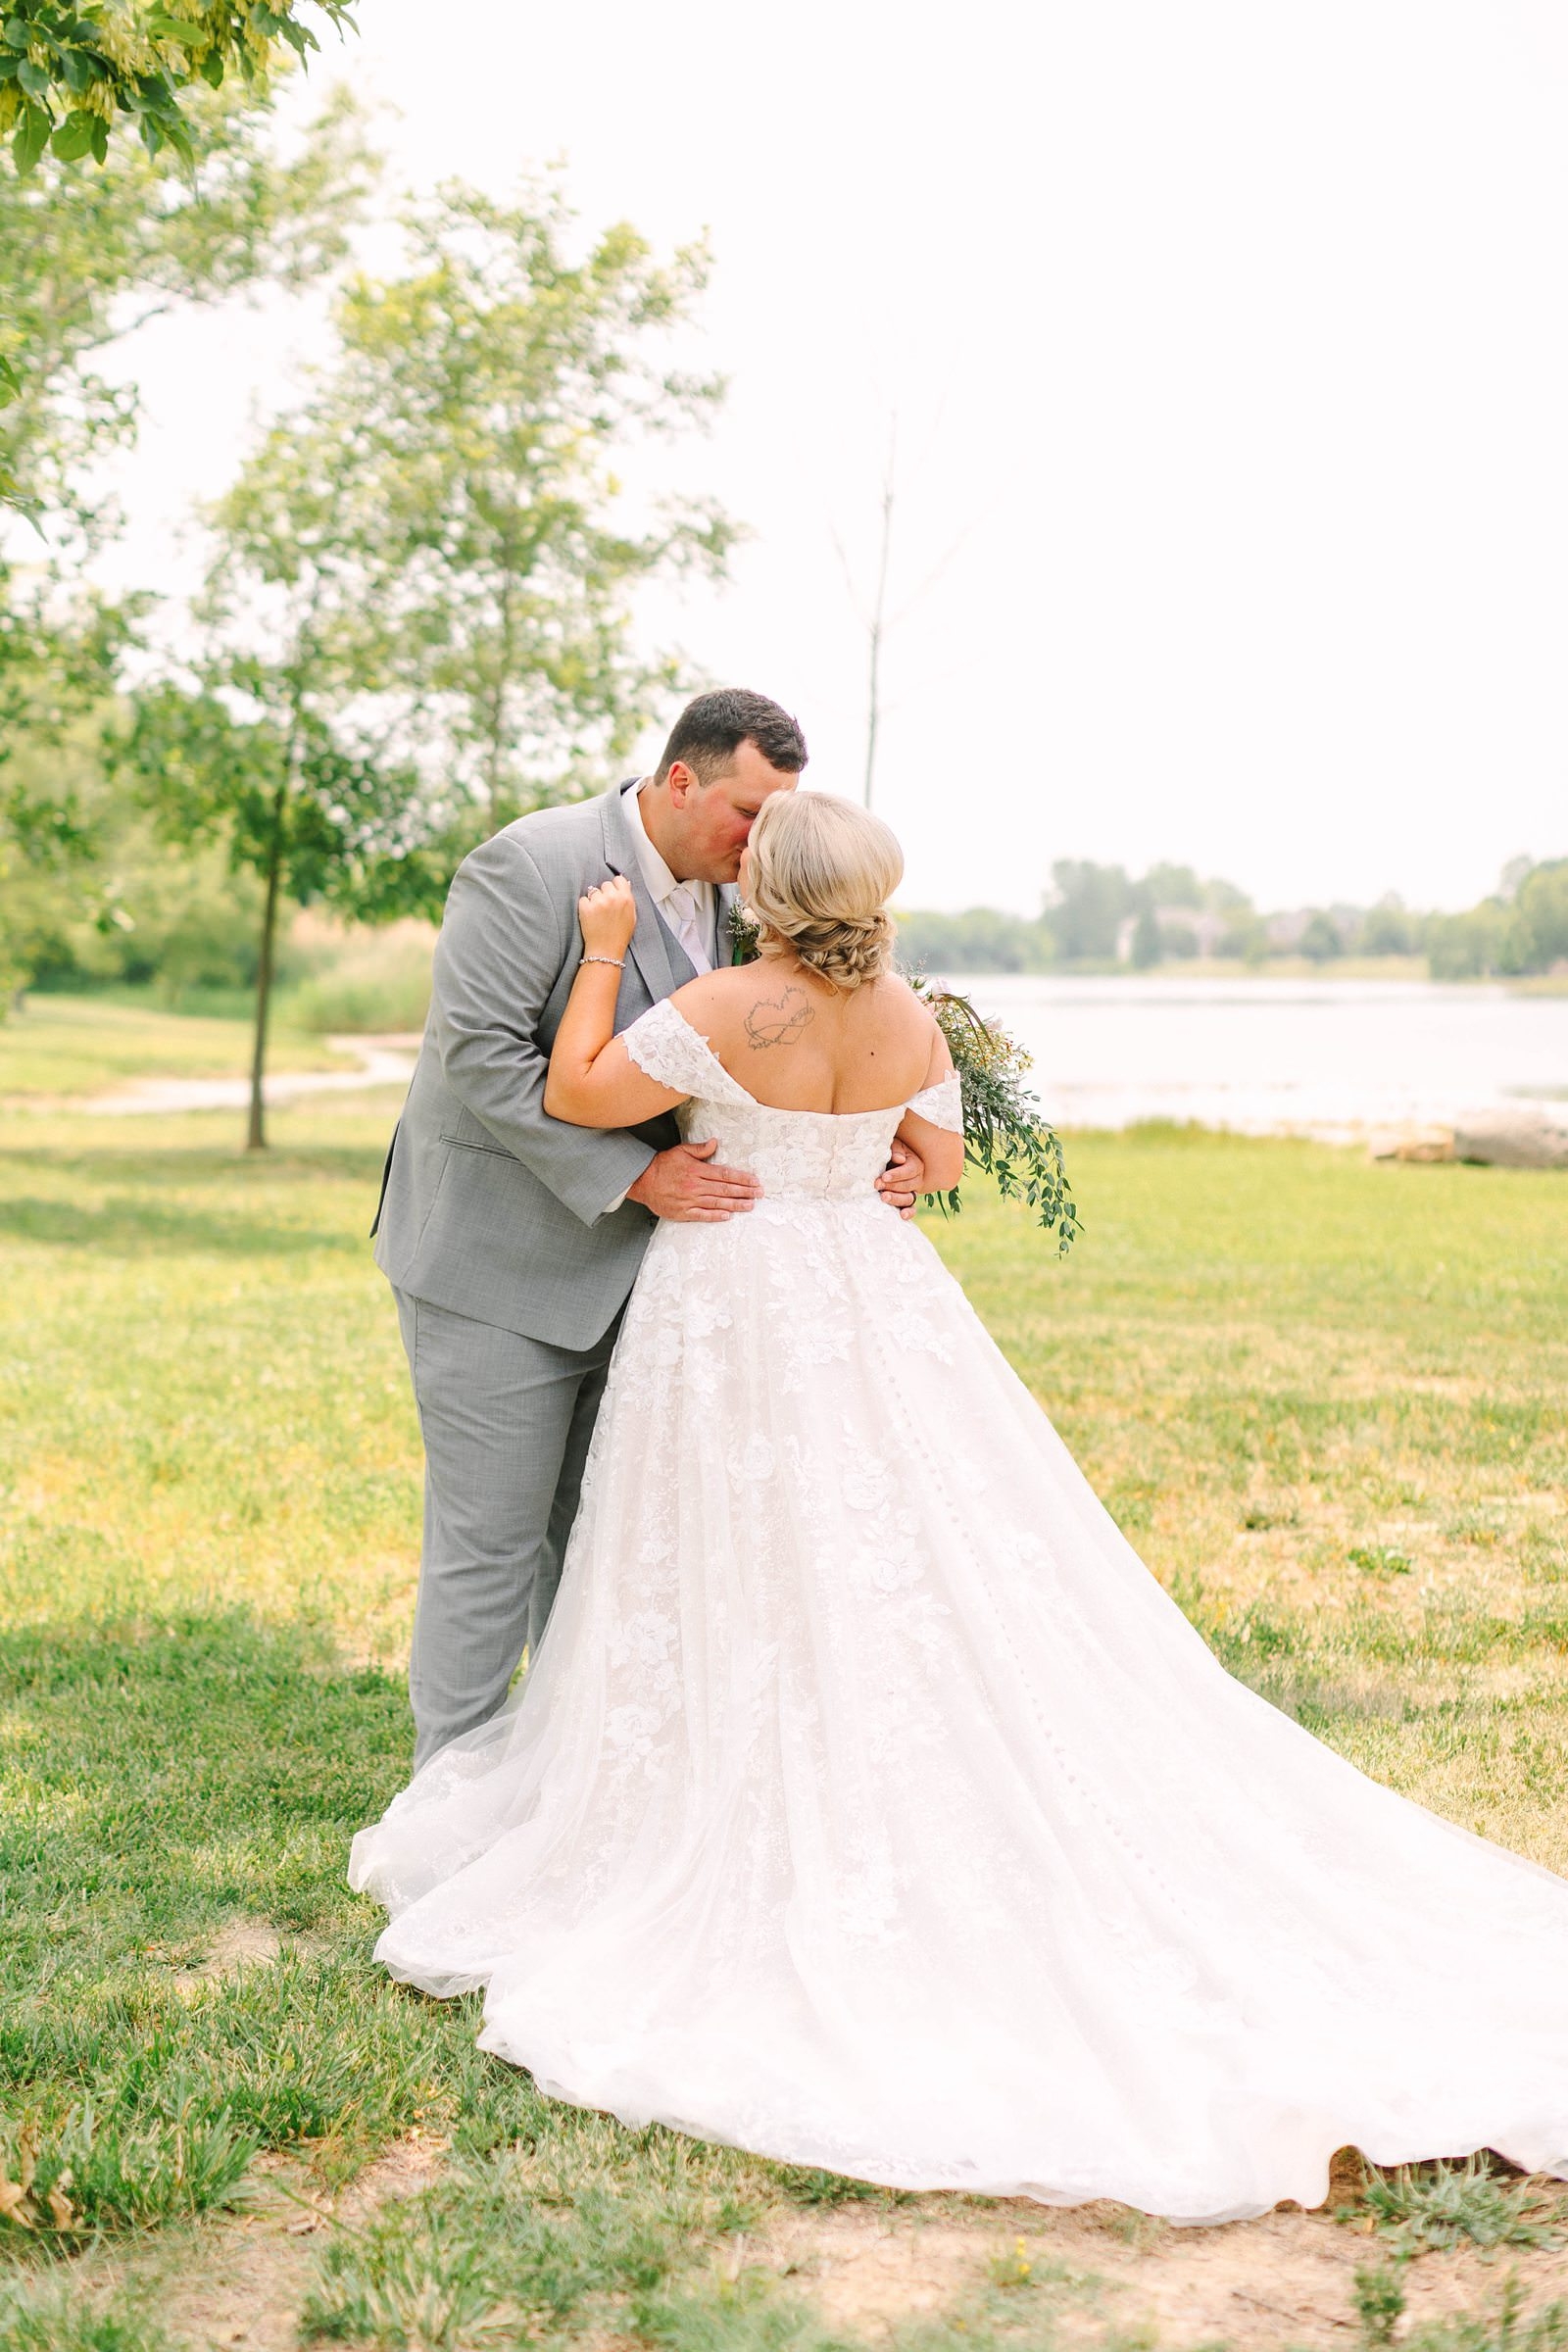 A Sunny Summer Wedding at Friedman Park in Newburgh Indiana | Paige and Dylan | Bret and Brandie Photography100.jpg